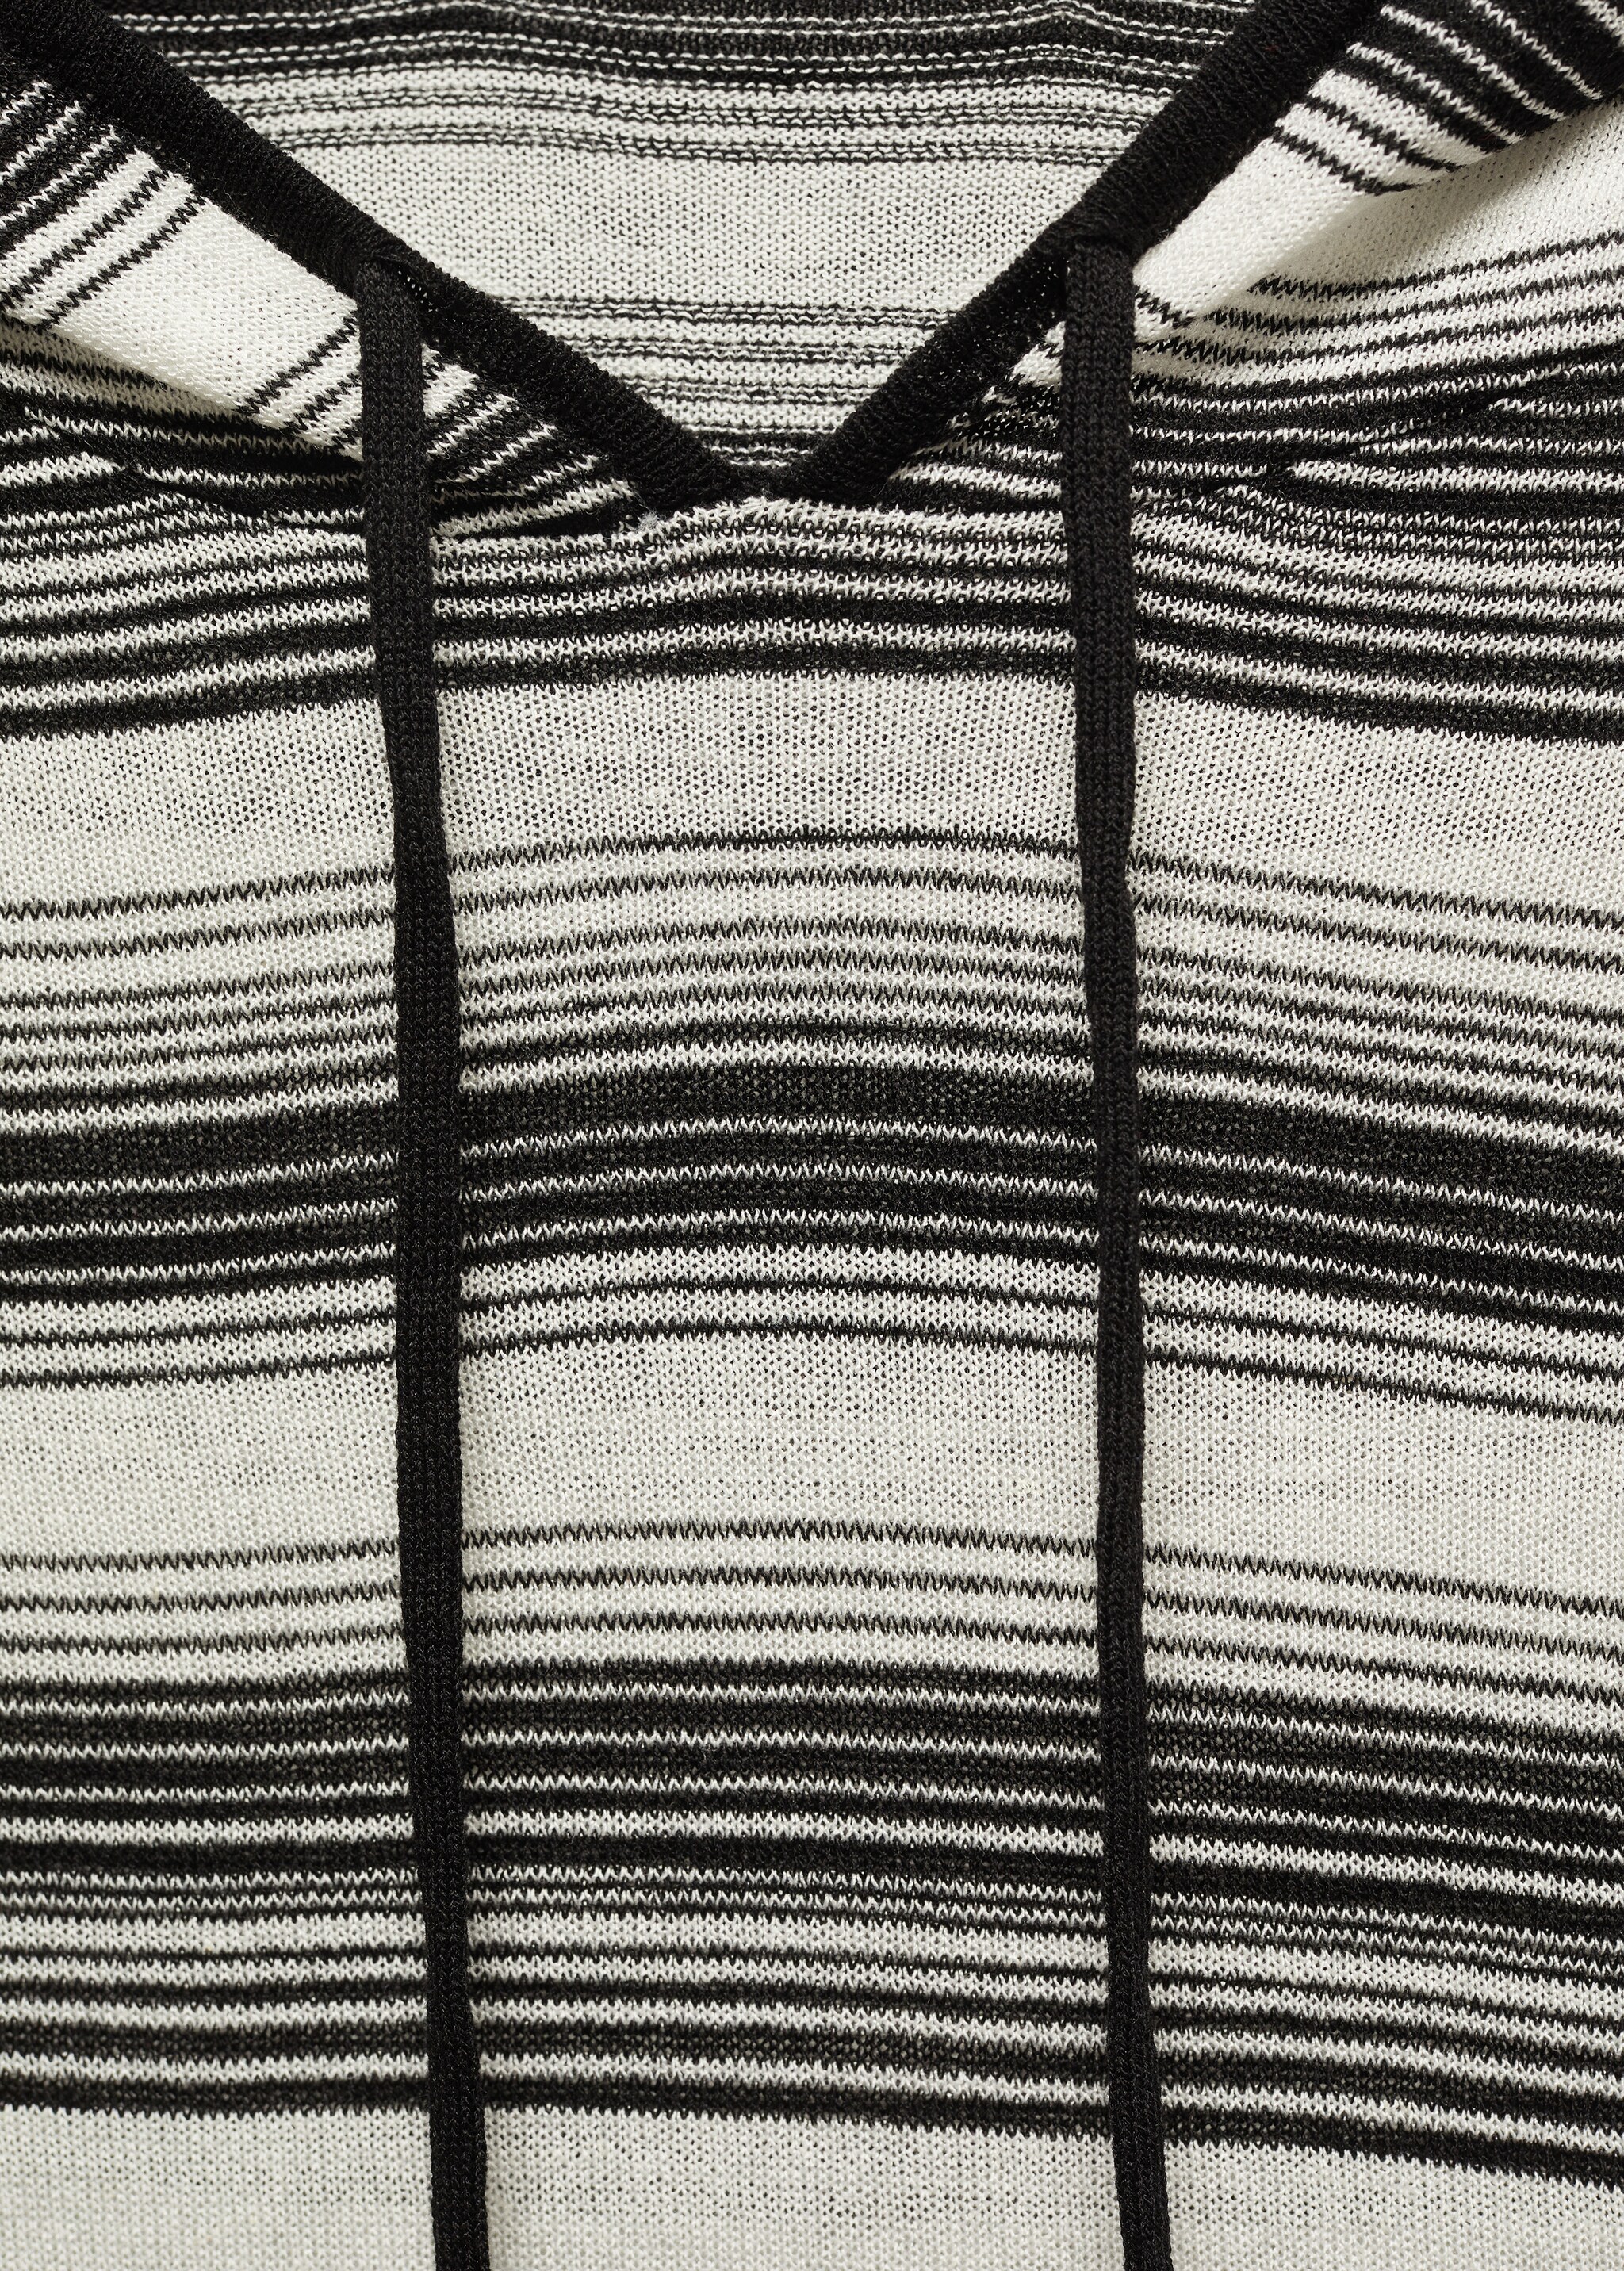 Hooded striped dress - Details of the article 8